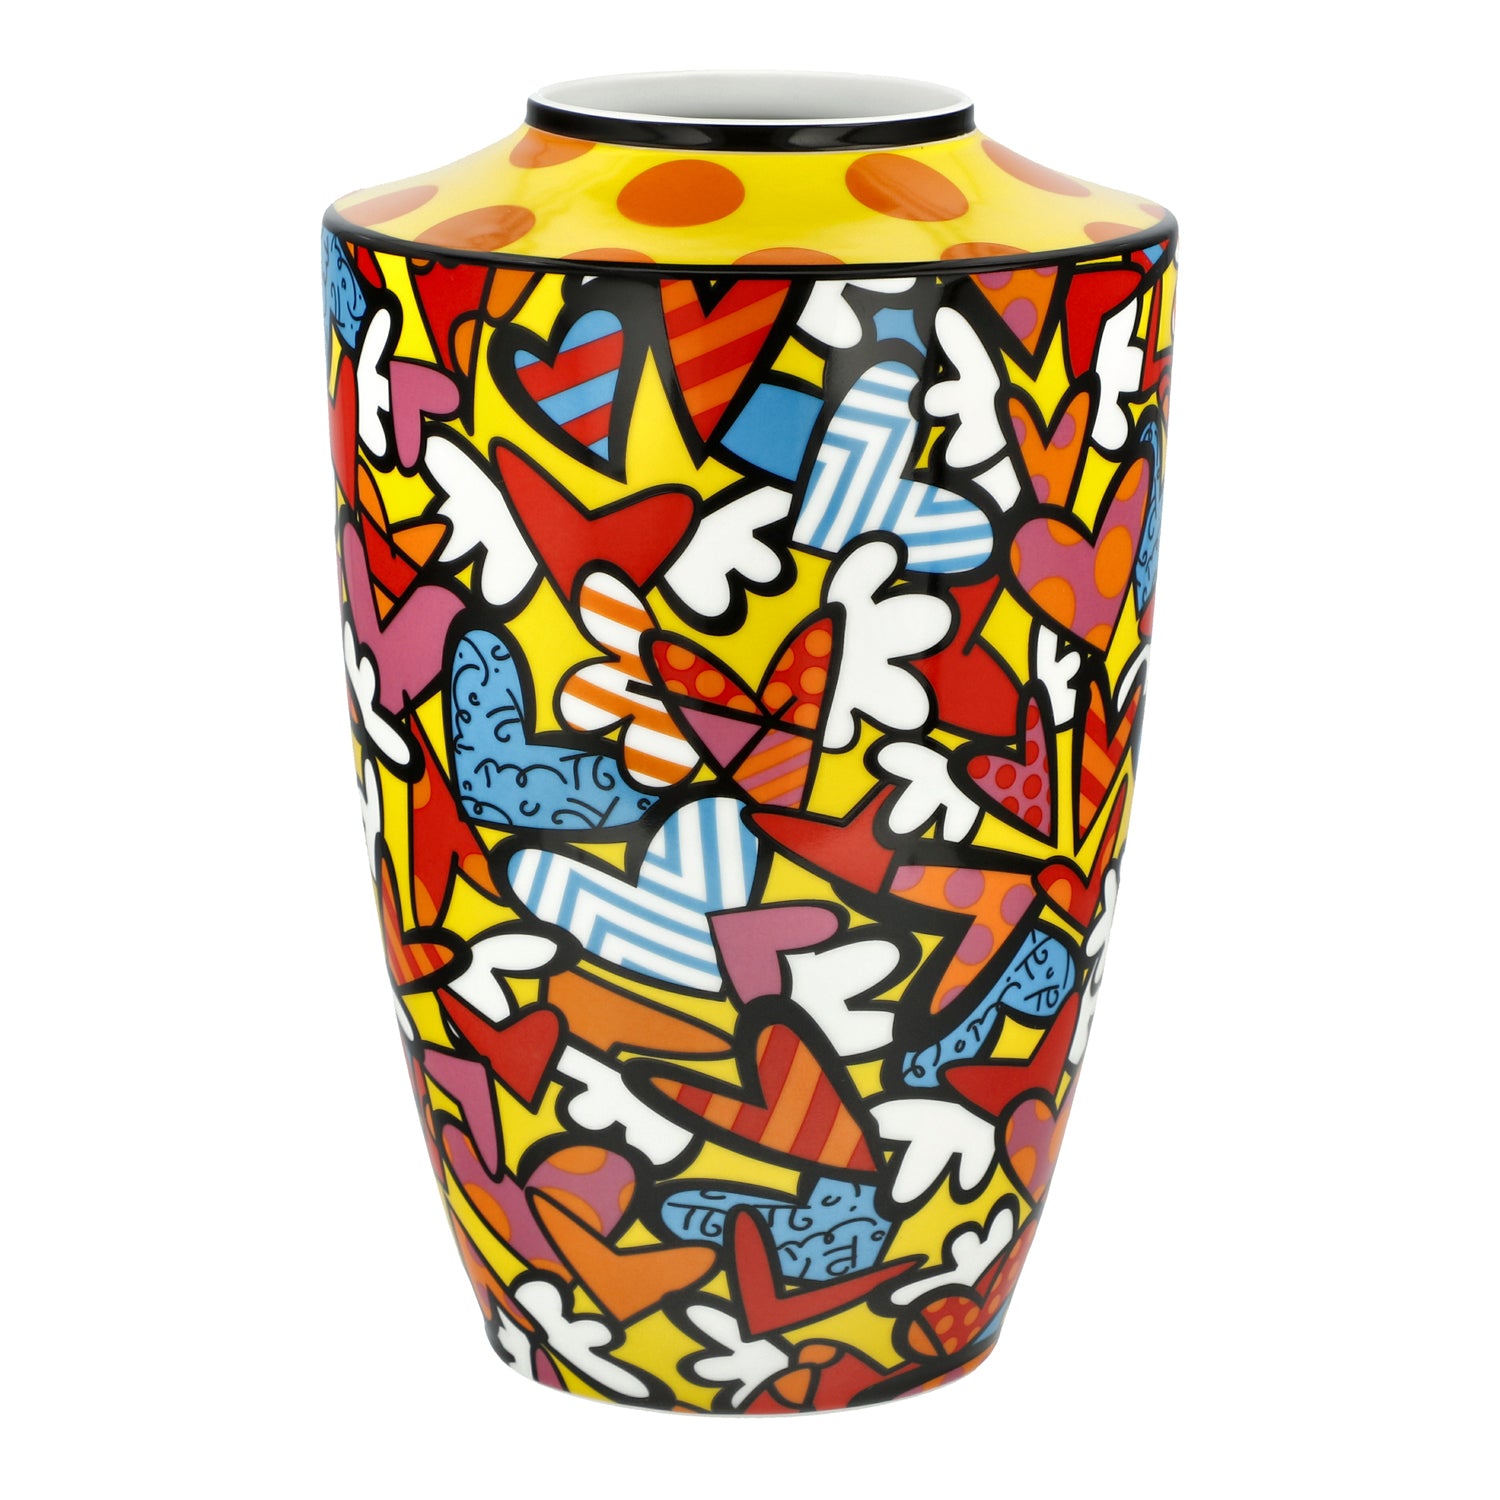 All we need is Love - Vase by Britto